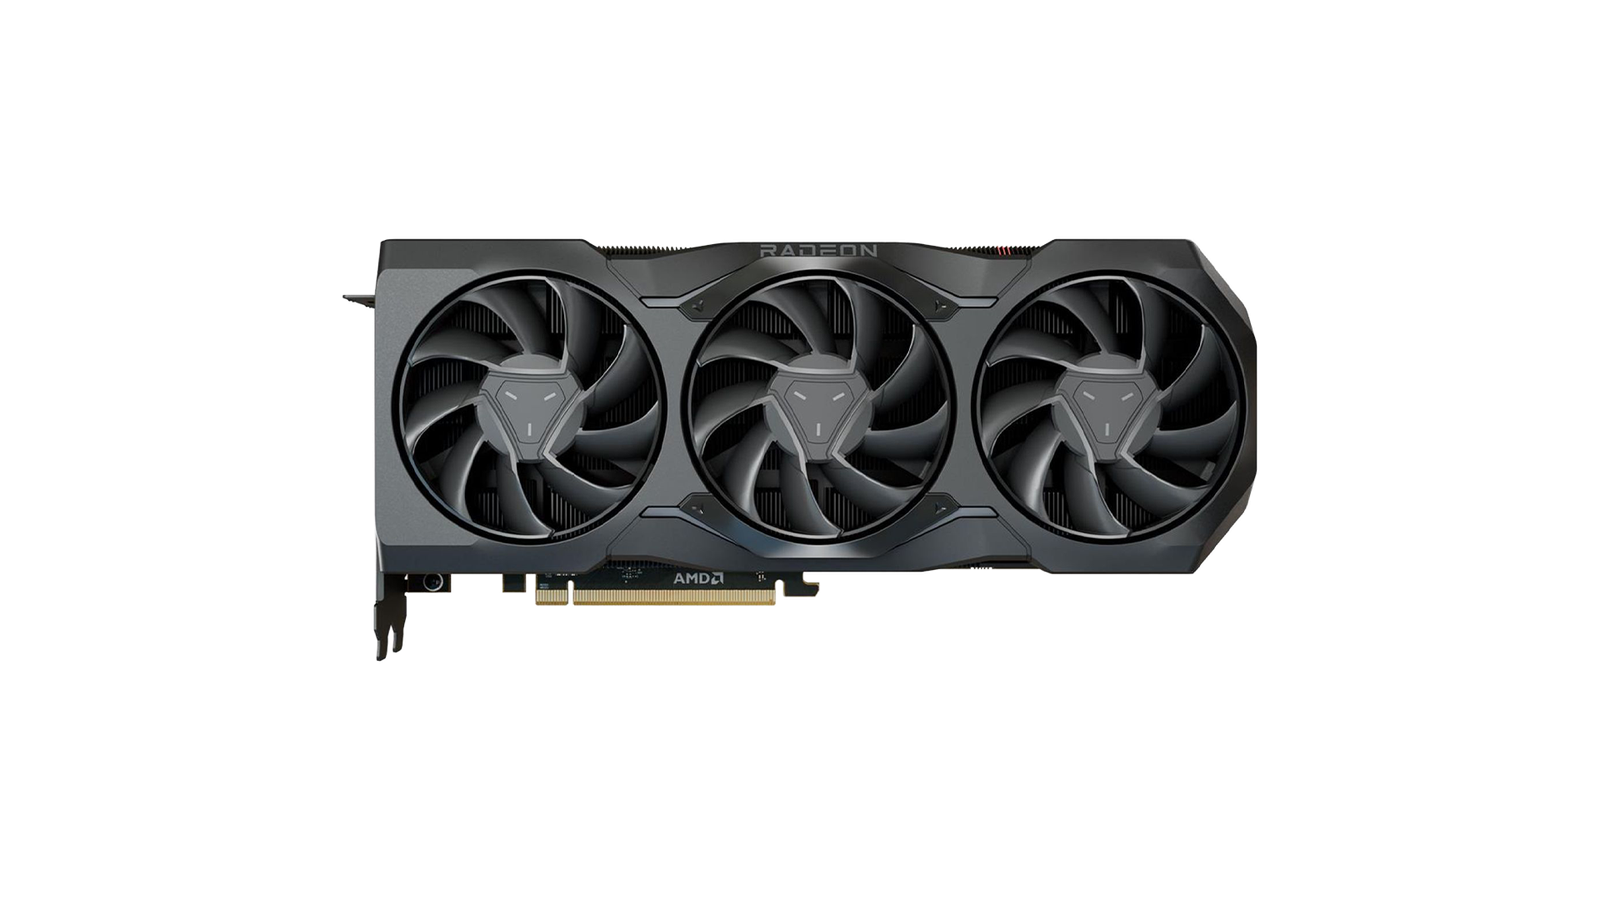 AMD Radeon R7900 XTX - Best value graphics card for VR